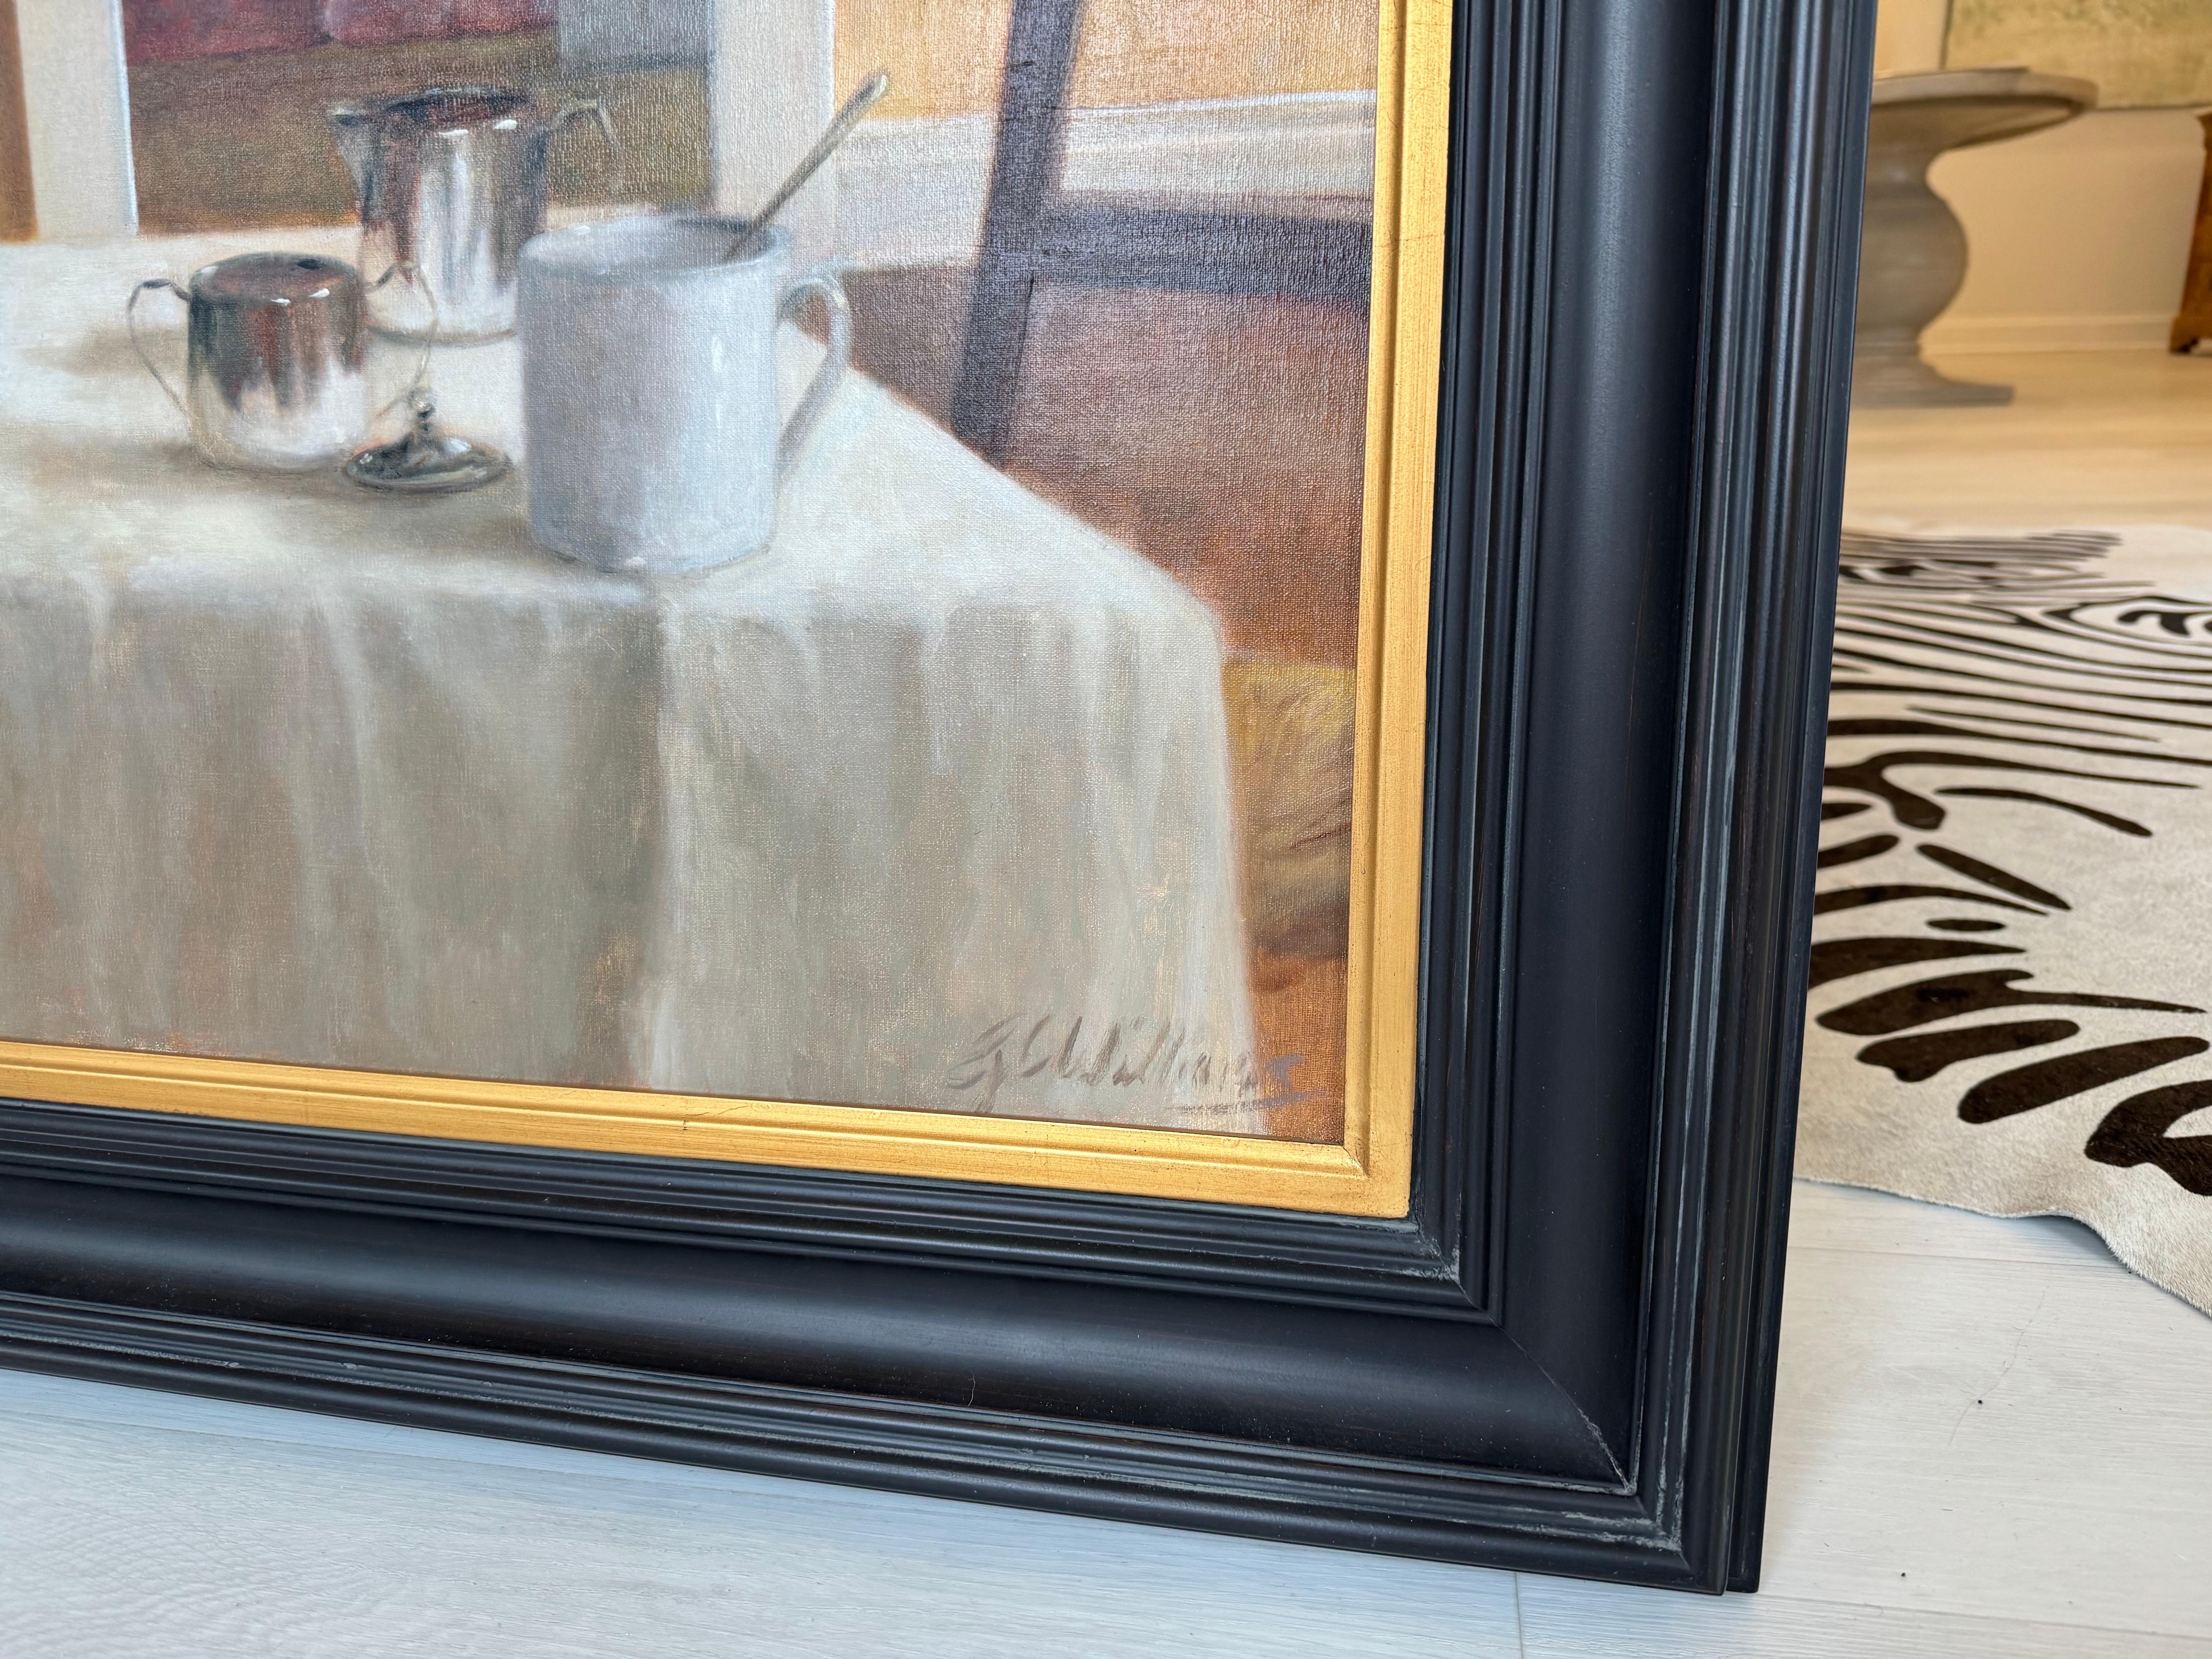 The Breakfast Room by Ginny Williams Framed Still Life Oil on Canvas, Silver 2